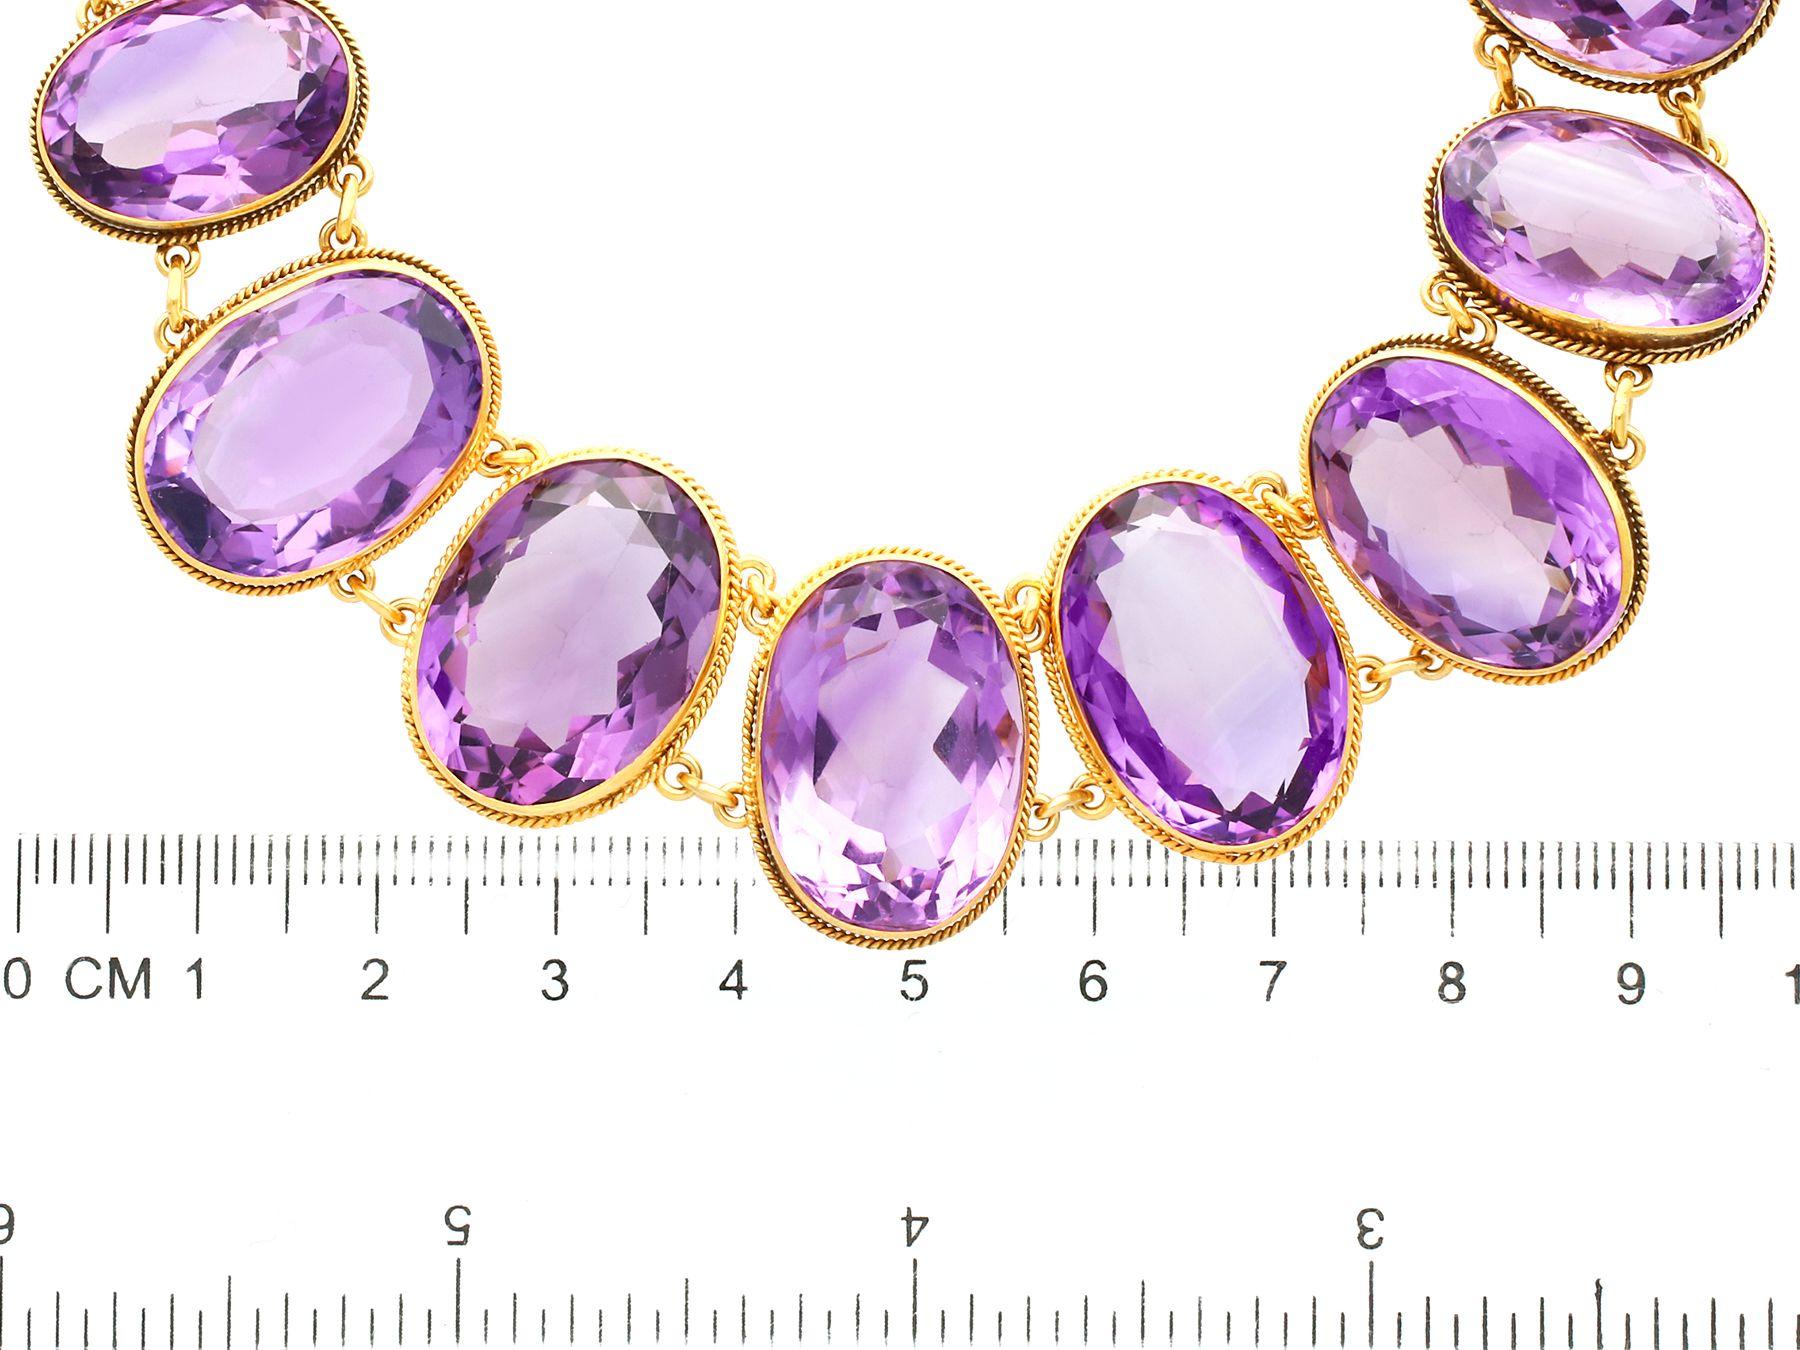 Antique Victorian 274.91 Carat Amethyst and Yellow Gold Rivière Necklace For Sale 1